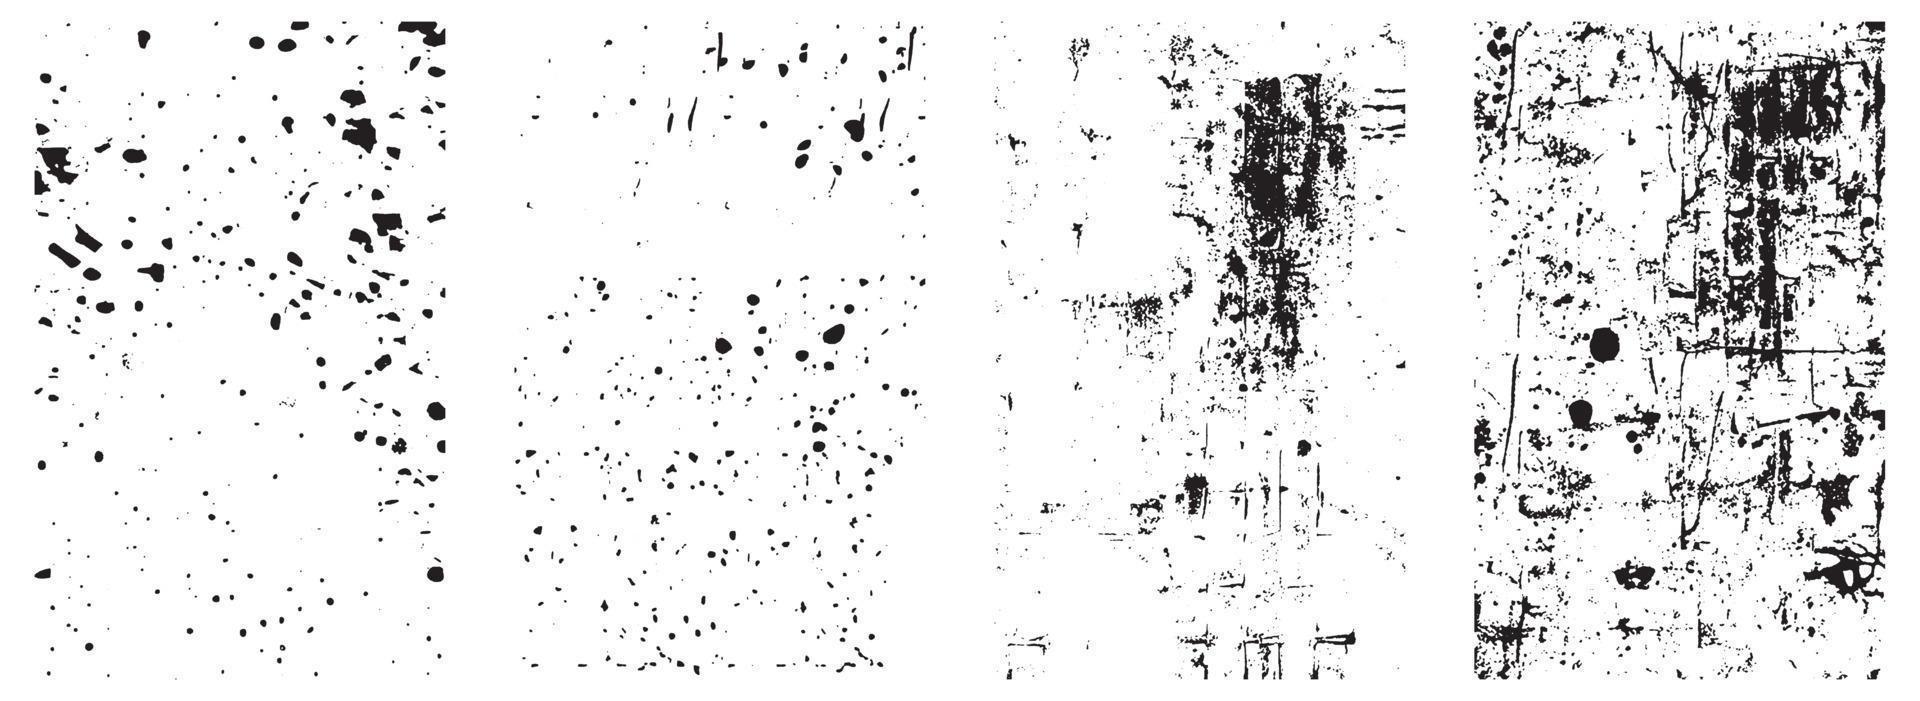 Set of Grunge Distress Vector Textures. Black and White Backgrounds with Splatter, Scratch and Stain Effects. EPS 10.